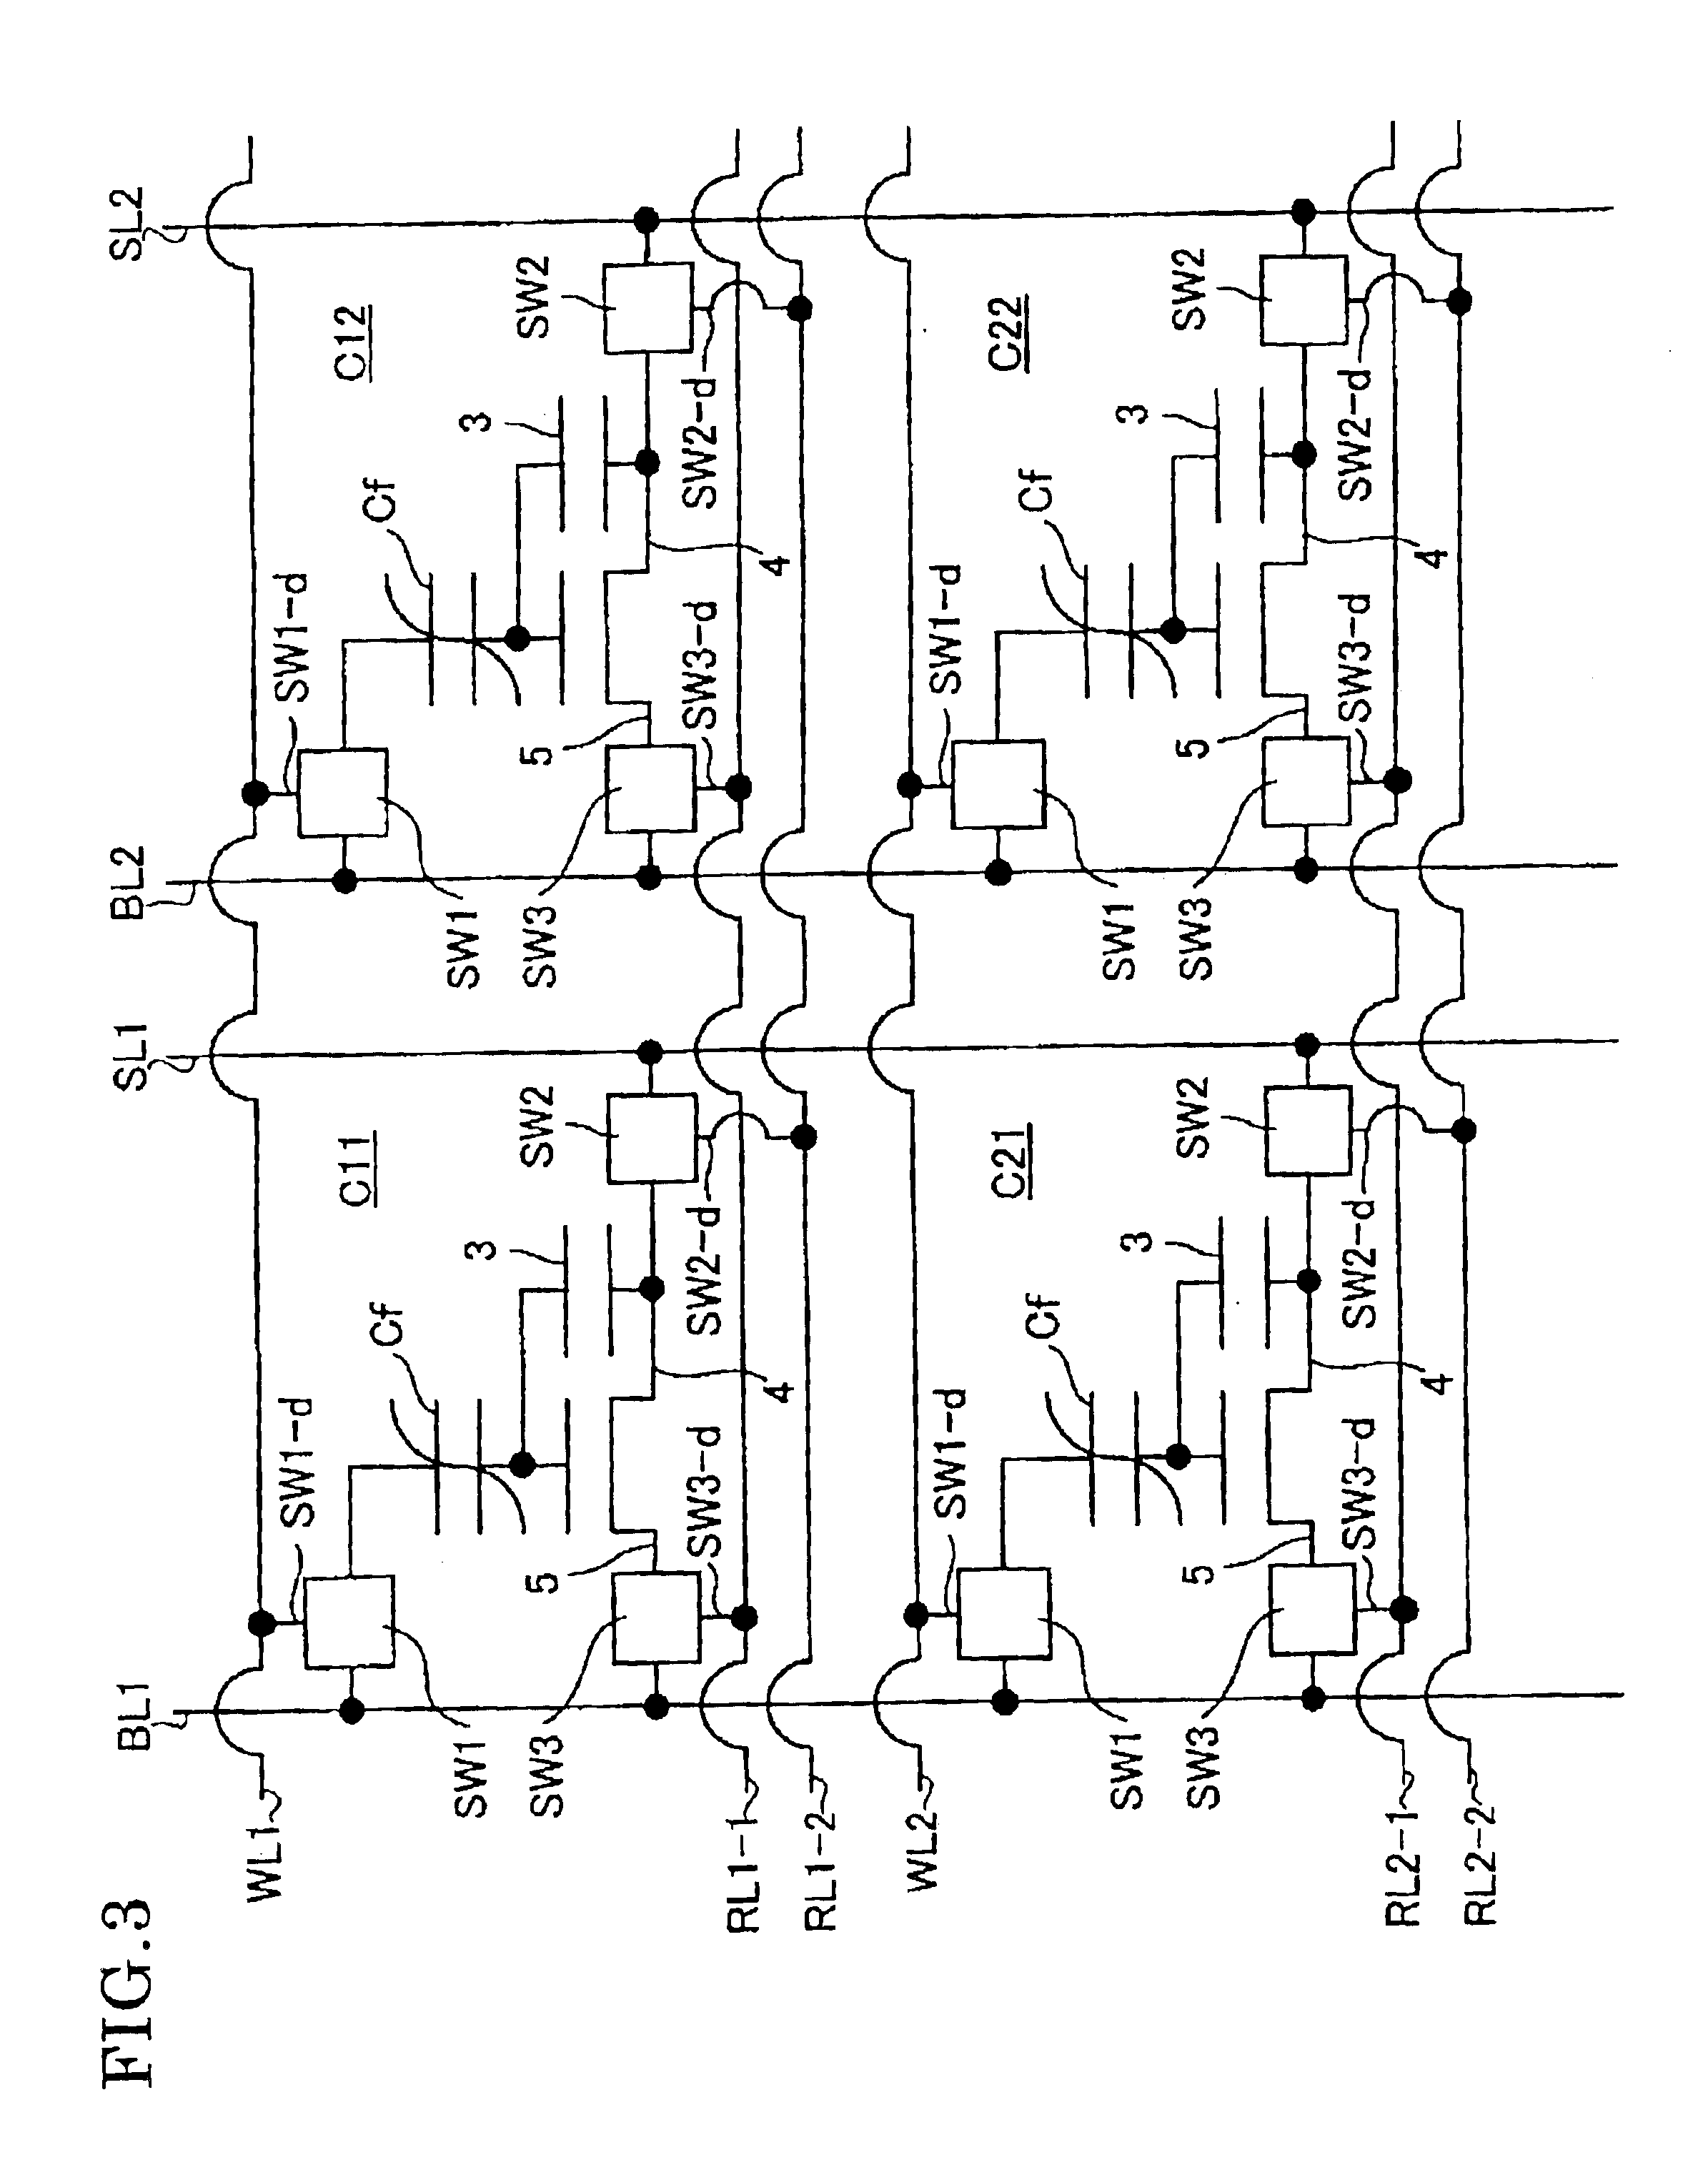 Ferroelectric non-volatile memory device having integral capacitor and gate electrode, and driving method of a ferroelectric non-volatile memory device